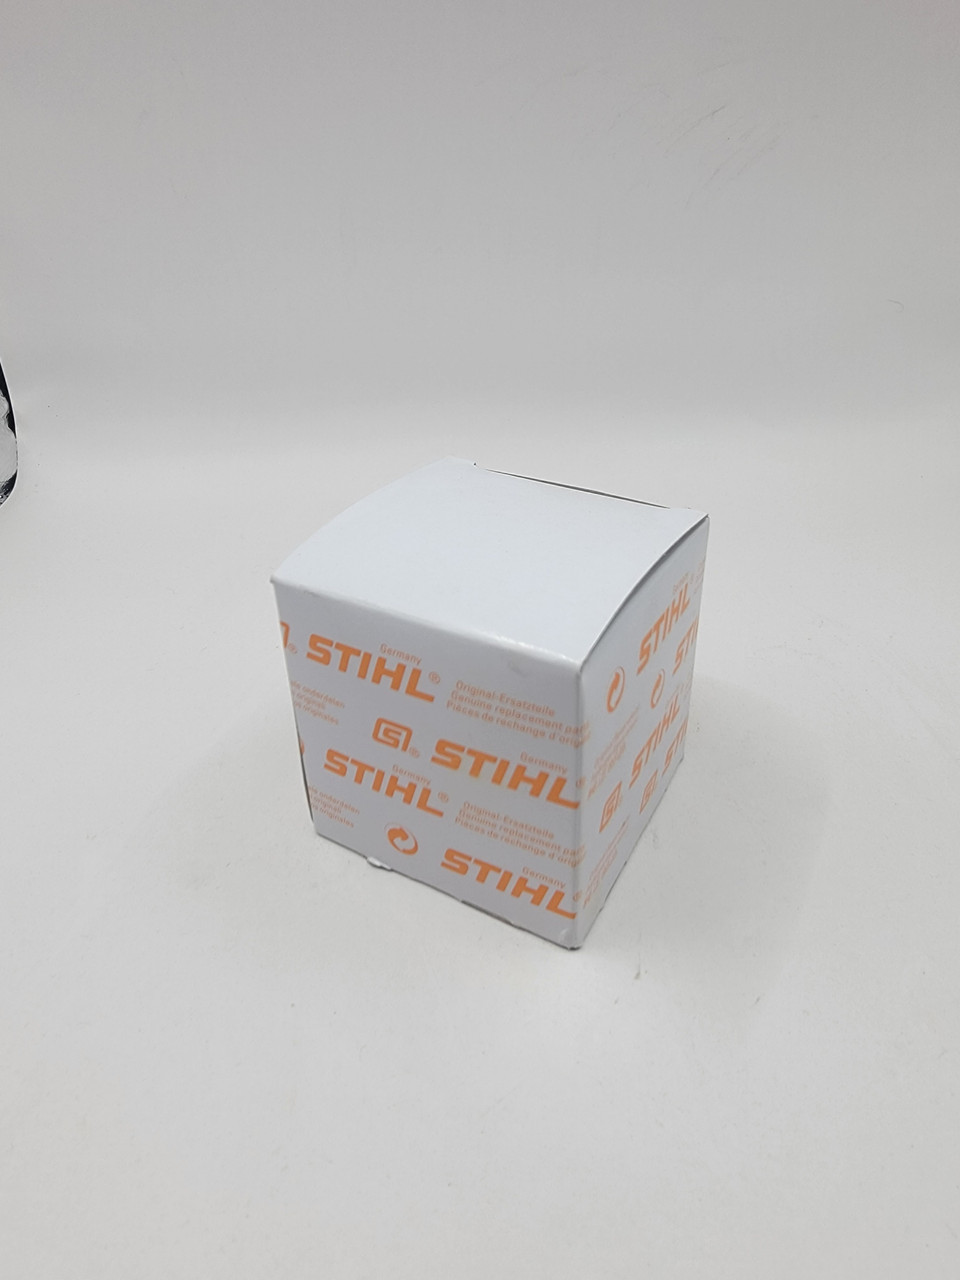 Stihl 4224 791 0900 CLAMP one package